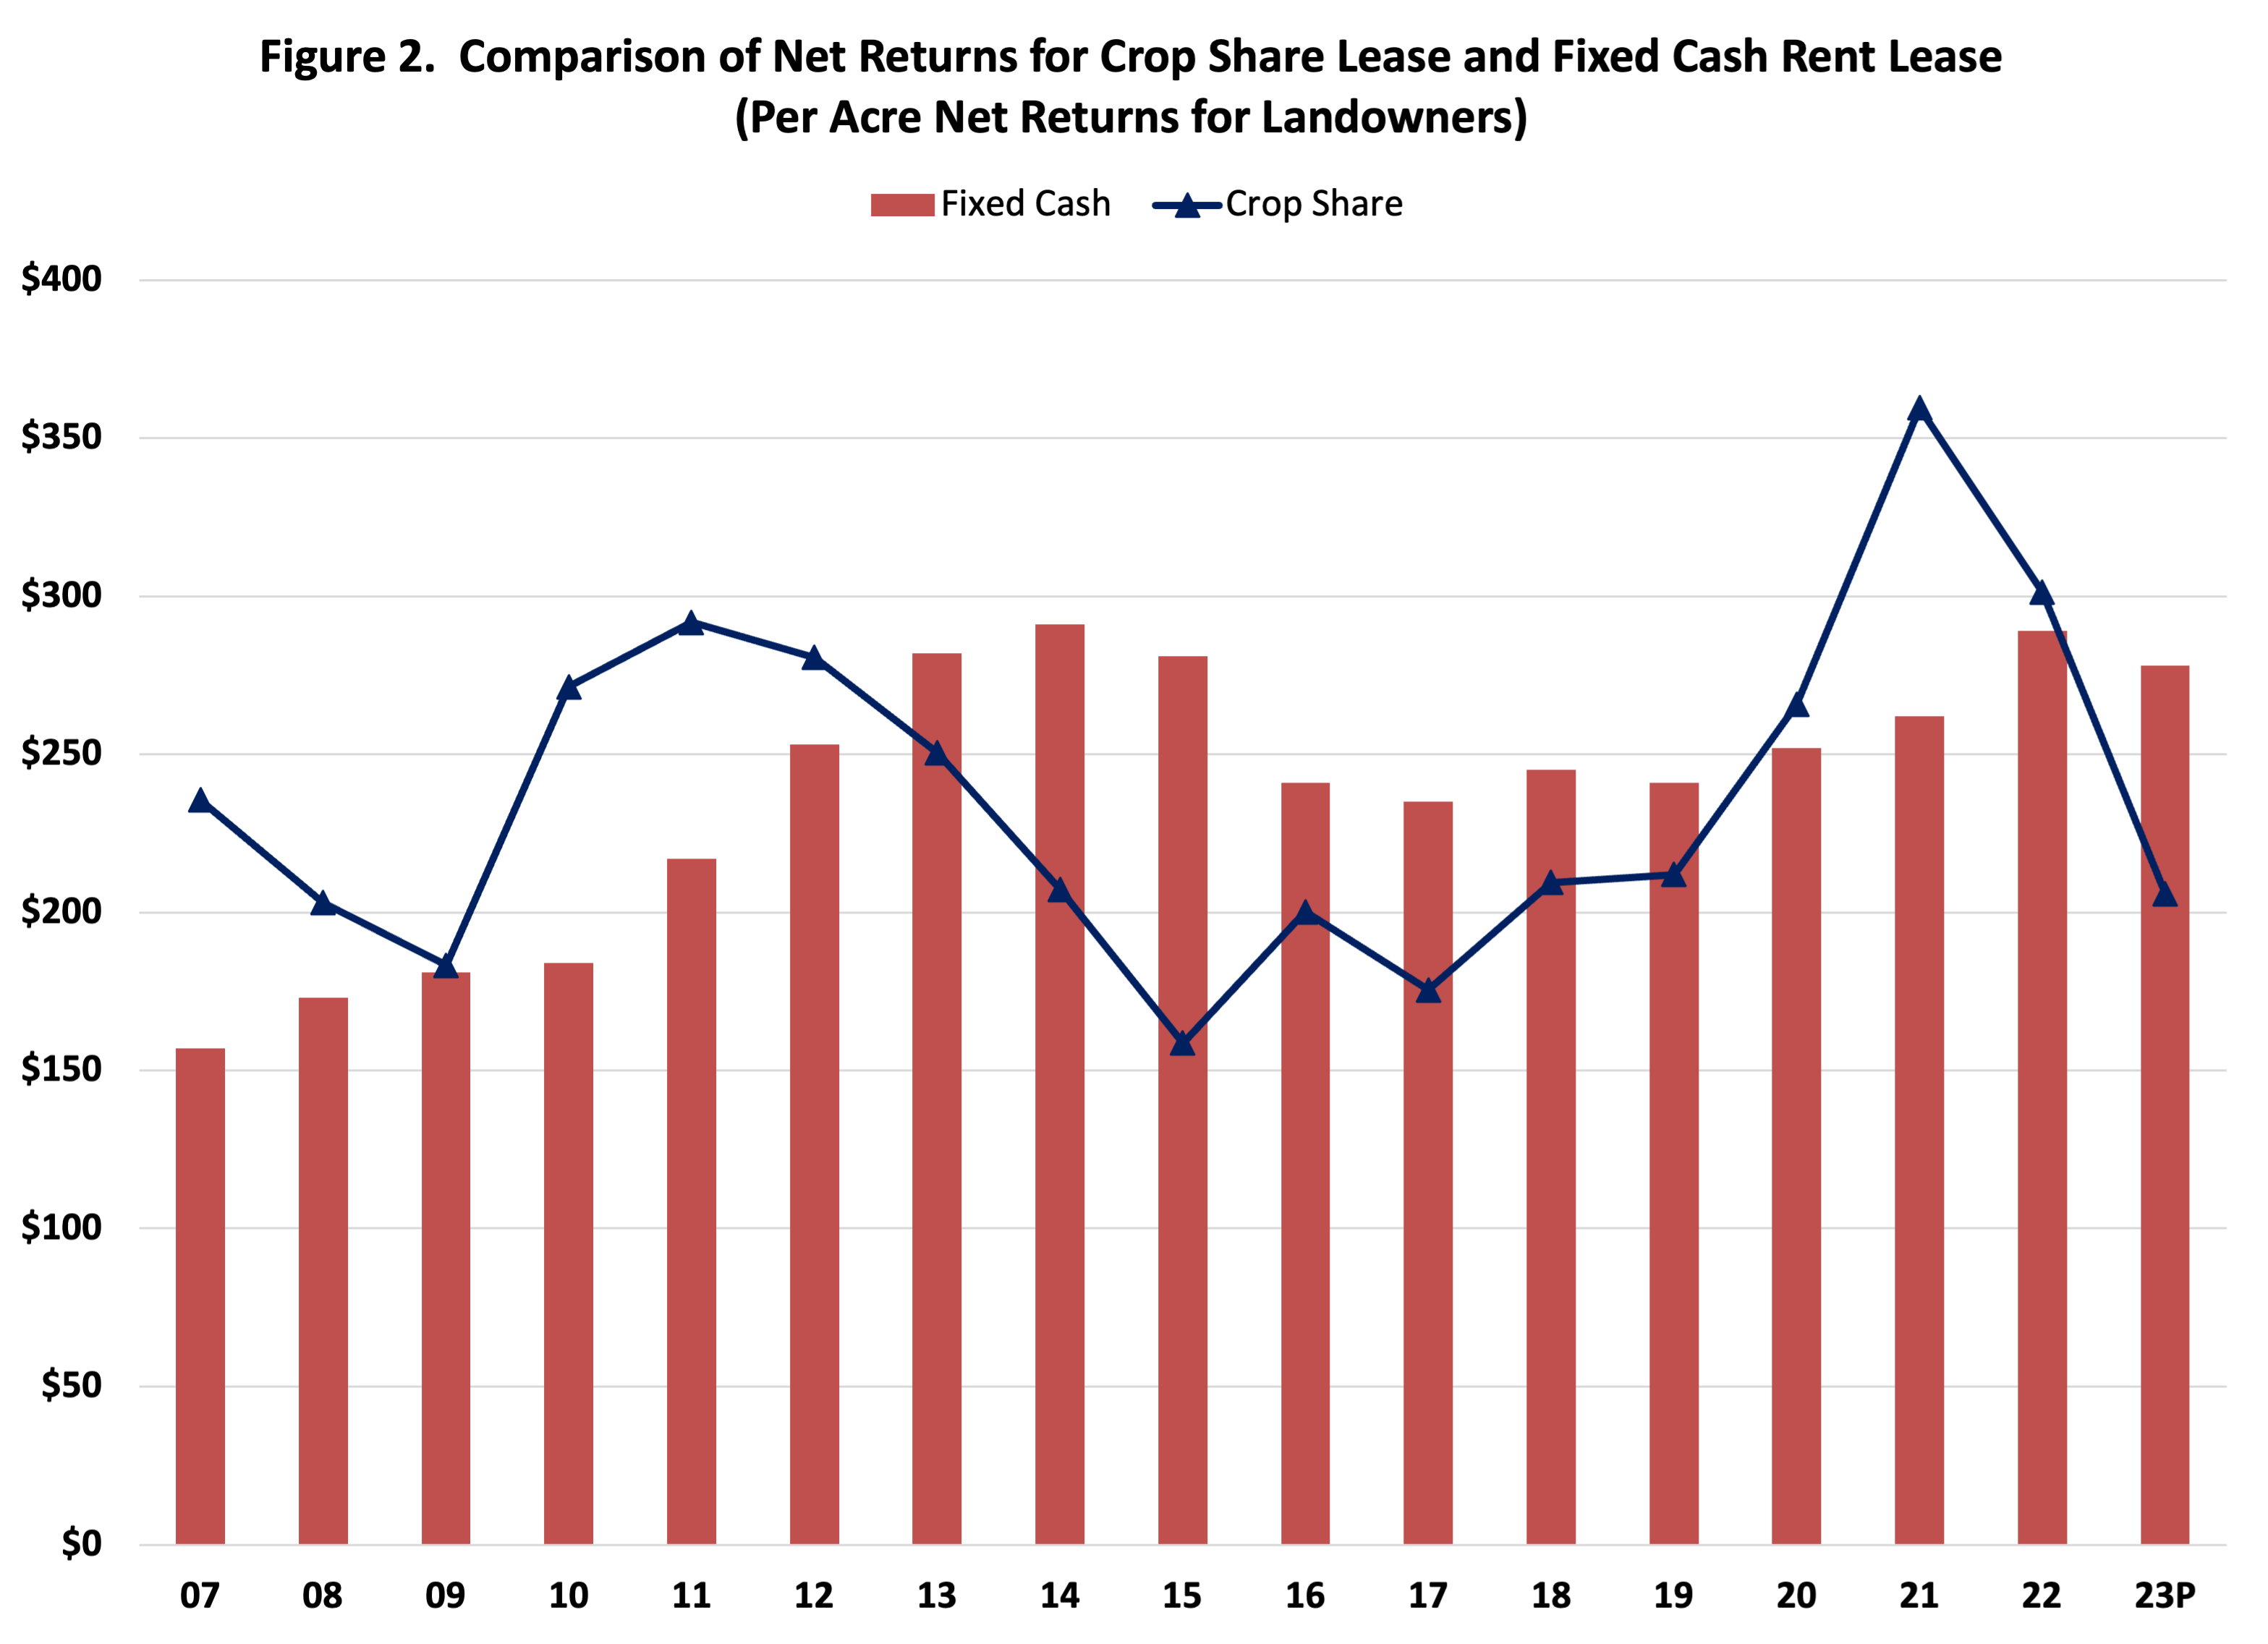 Figure 2.  Comparison of Net Returns for Crop Share Lease and Fixed Cash Rent Lease(Per Acre Net Returns for Landowners)